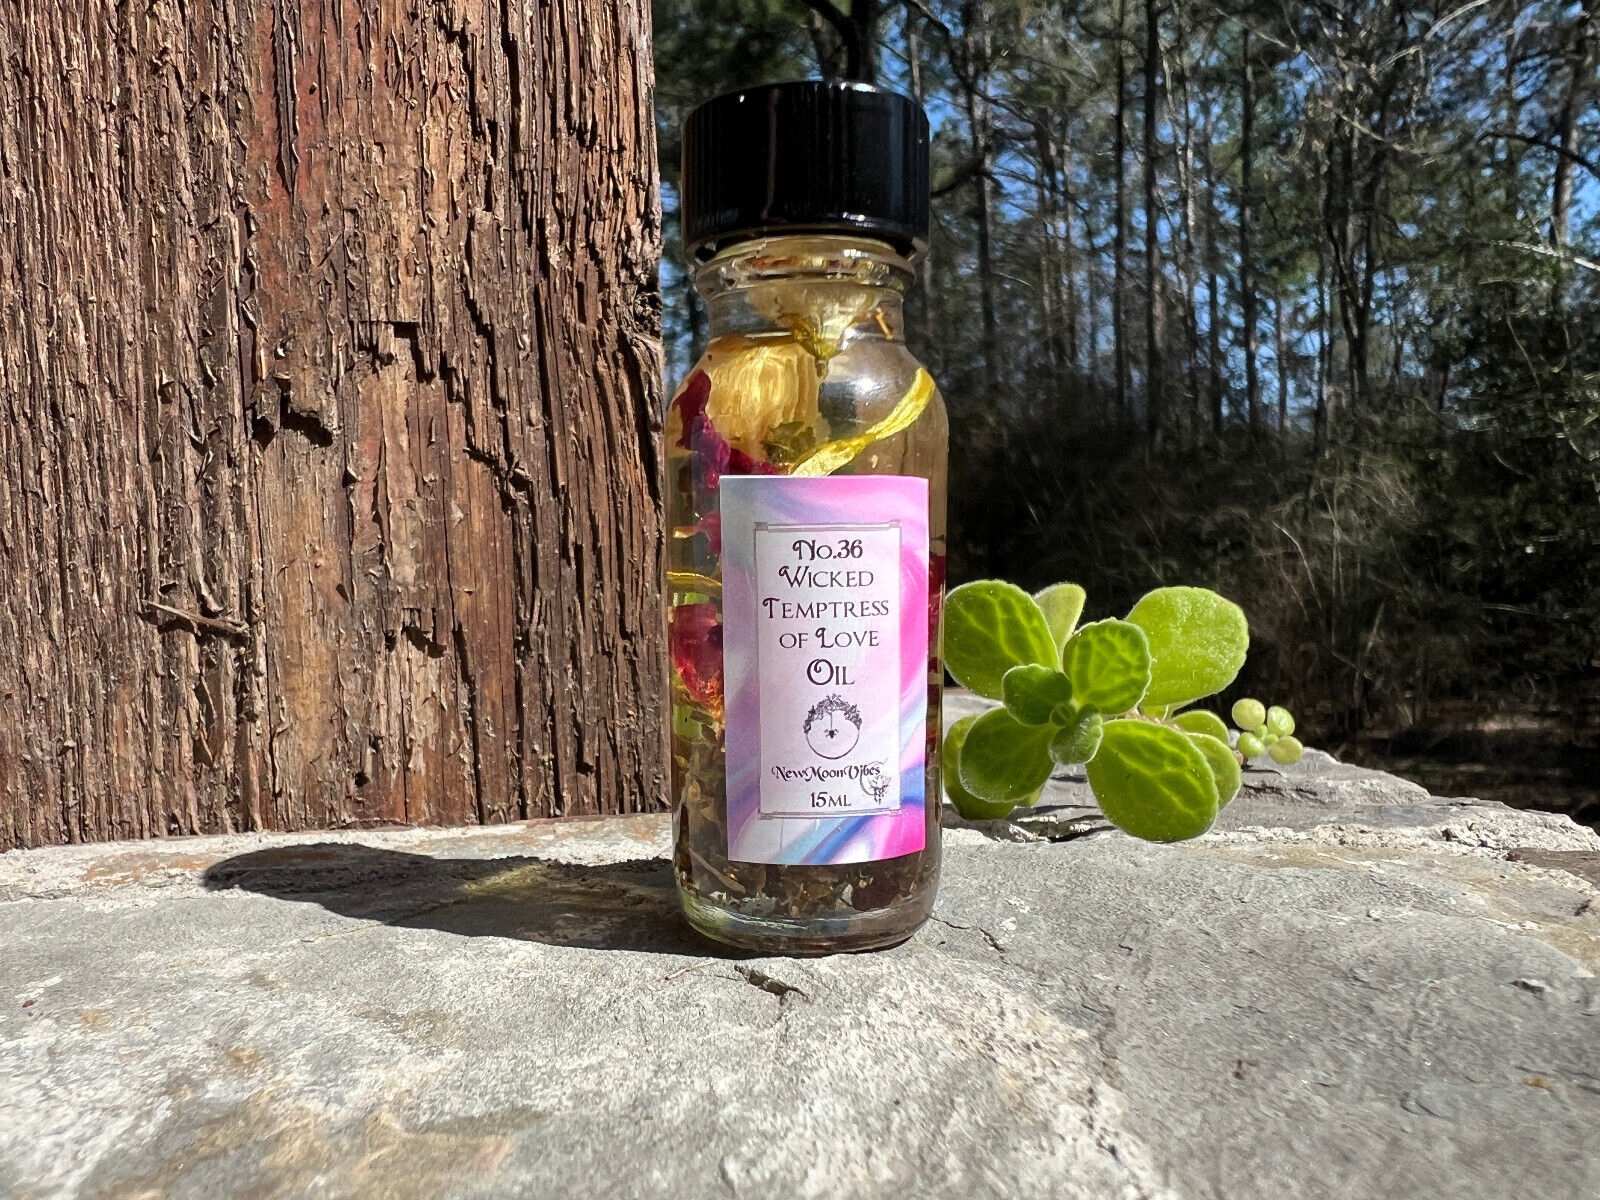 Wicked Temptress of Love Oil Sex Appeal, Sensuality, Seduction Attraction Spells